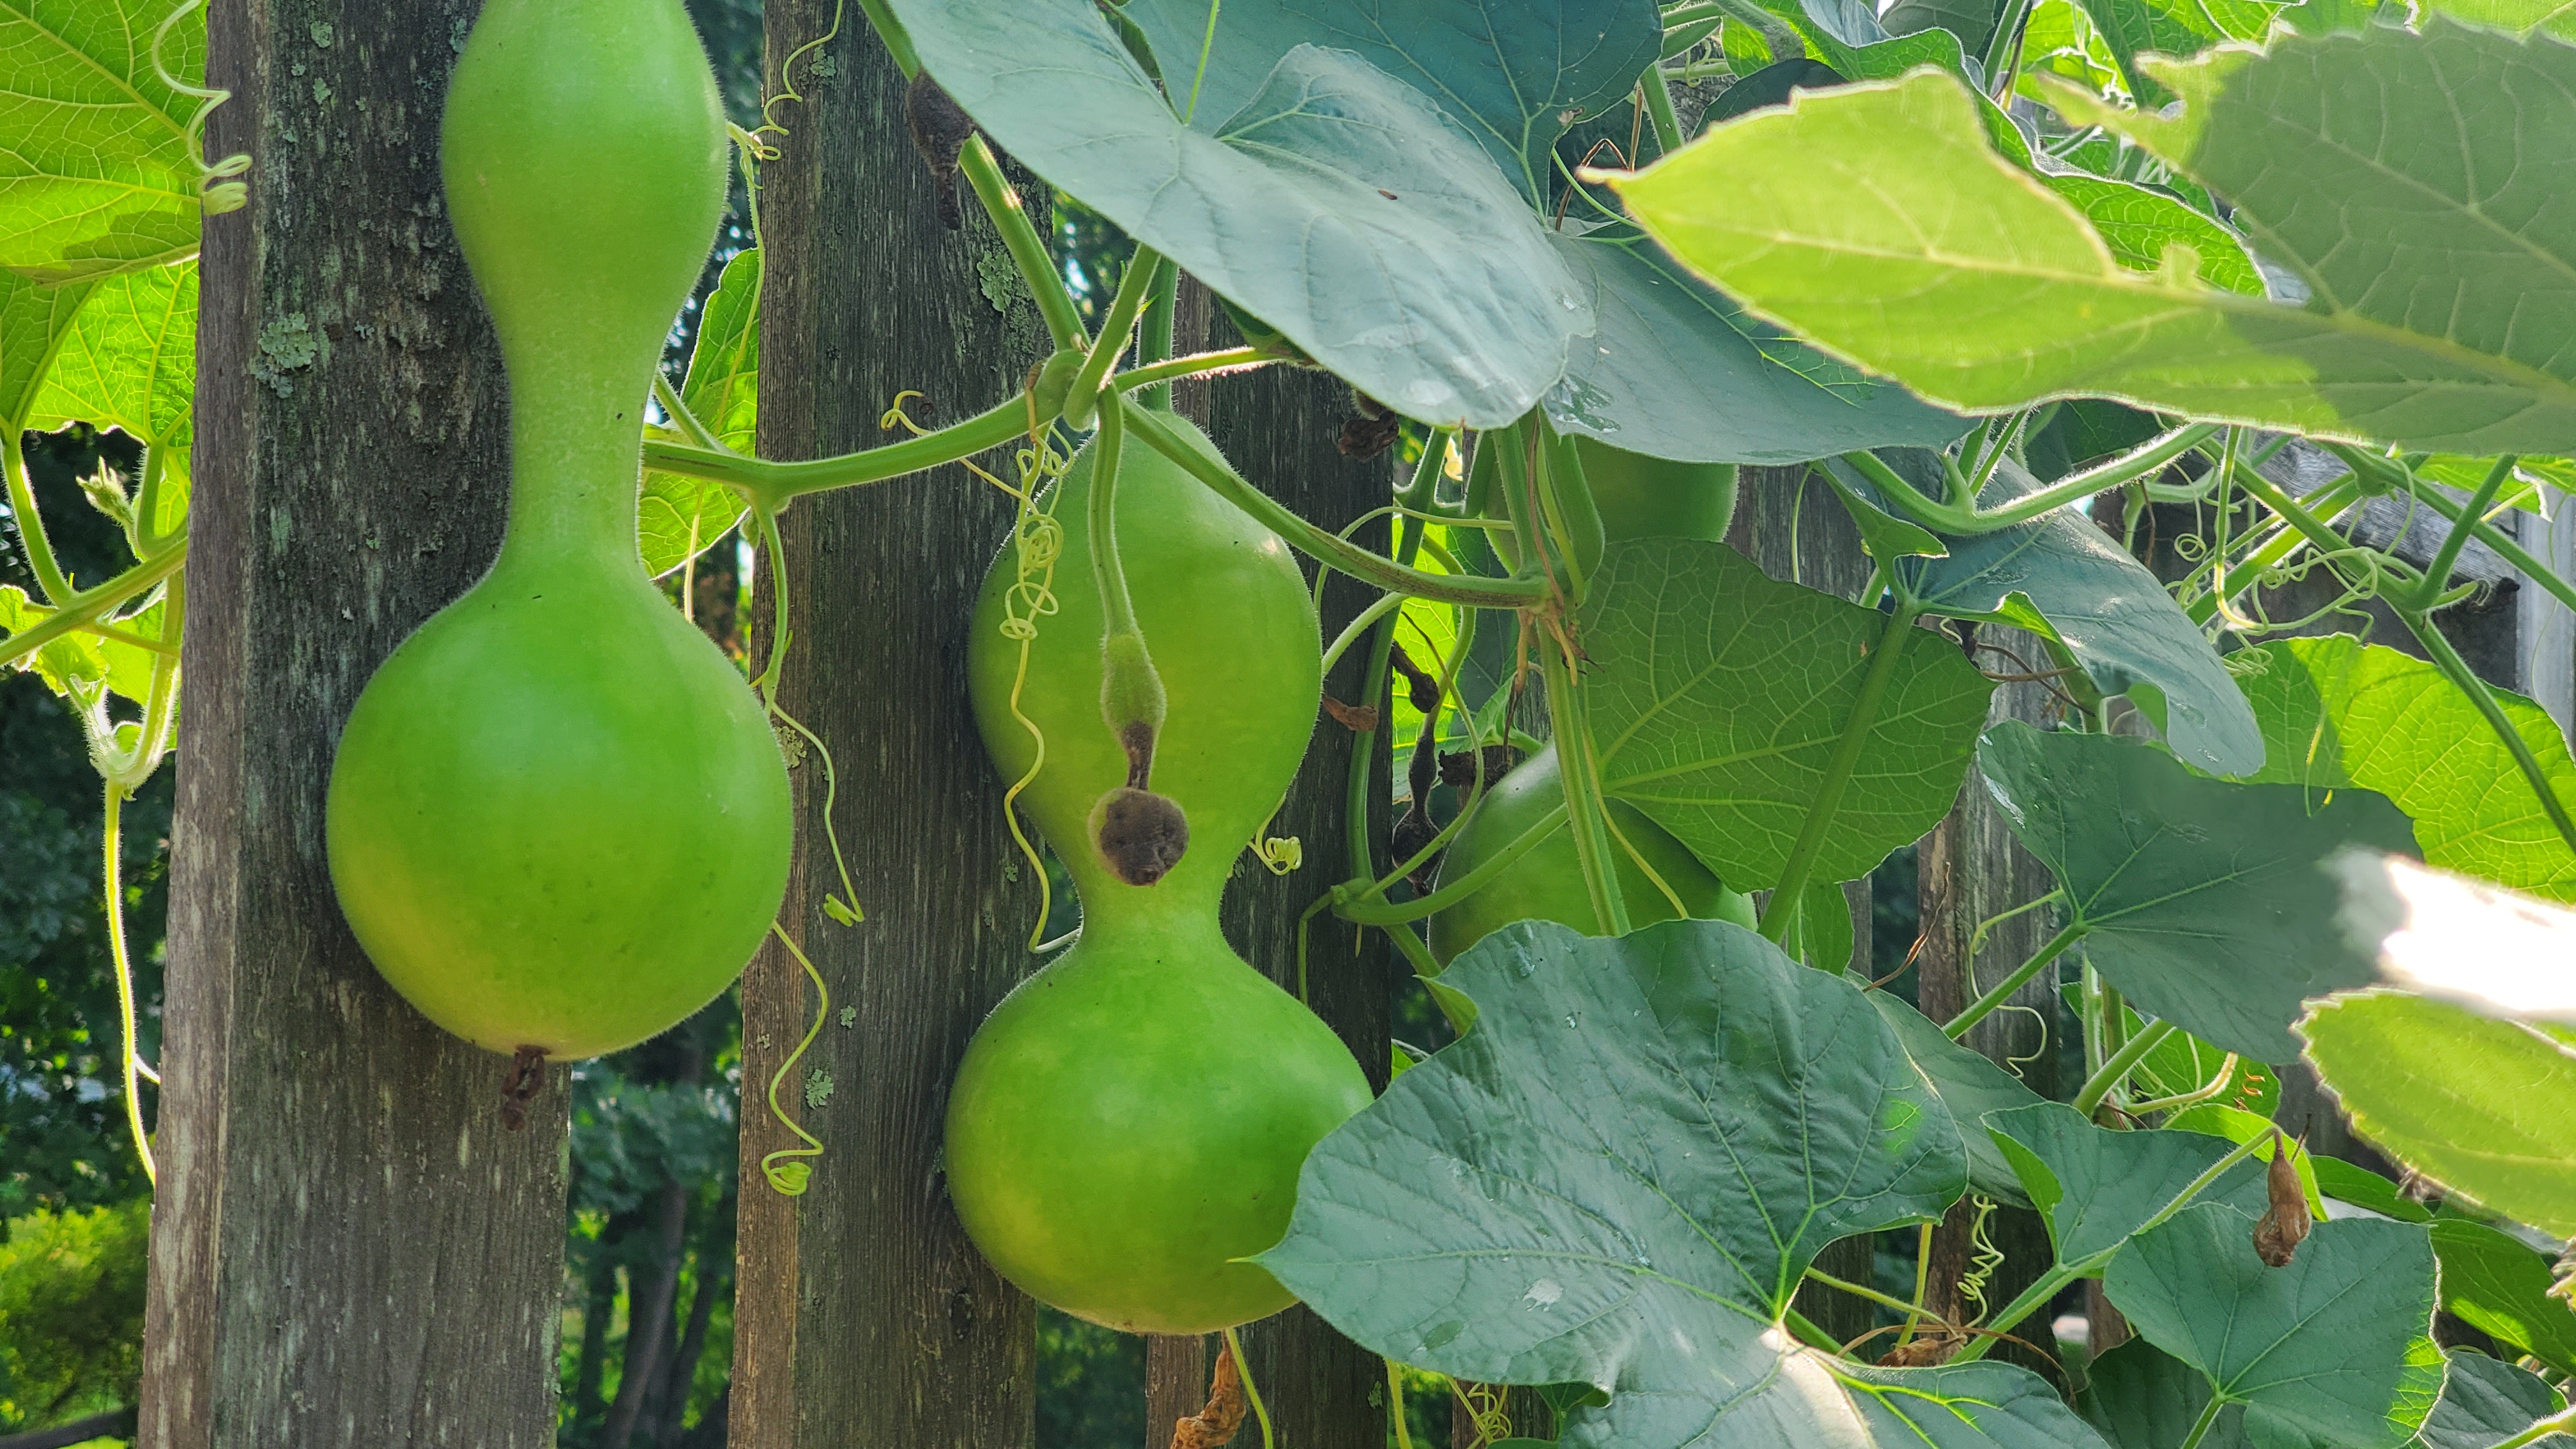 Immature gourds on the vine